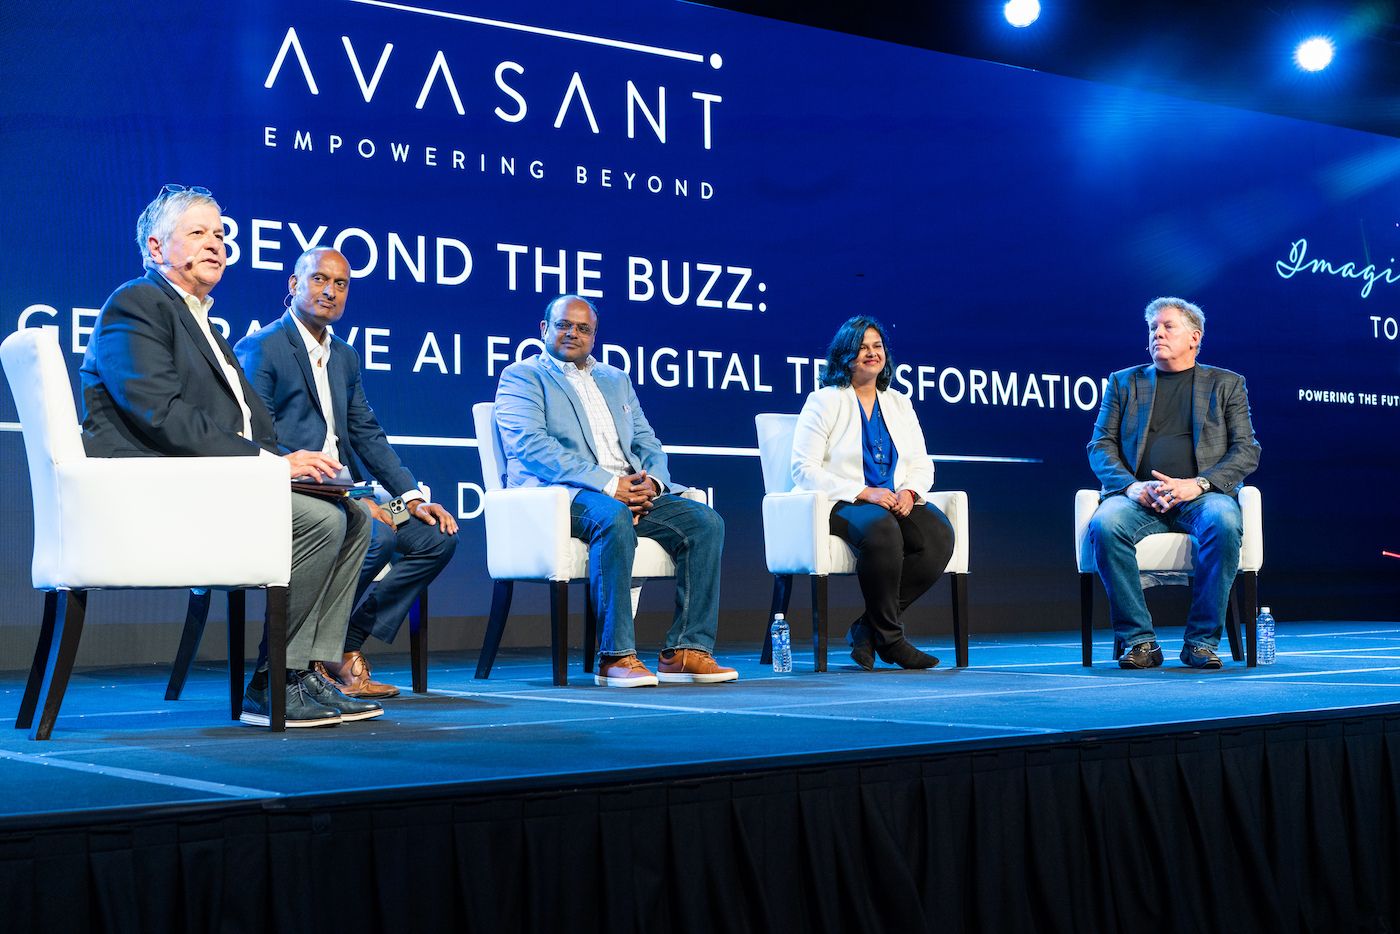 Shilpi Agarwal Founder and CEO DataEthics4All Foundation Avasant Empowering Beyond Summit 2023